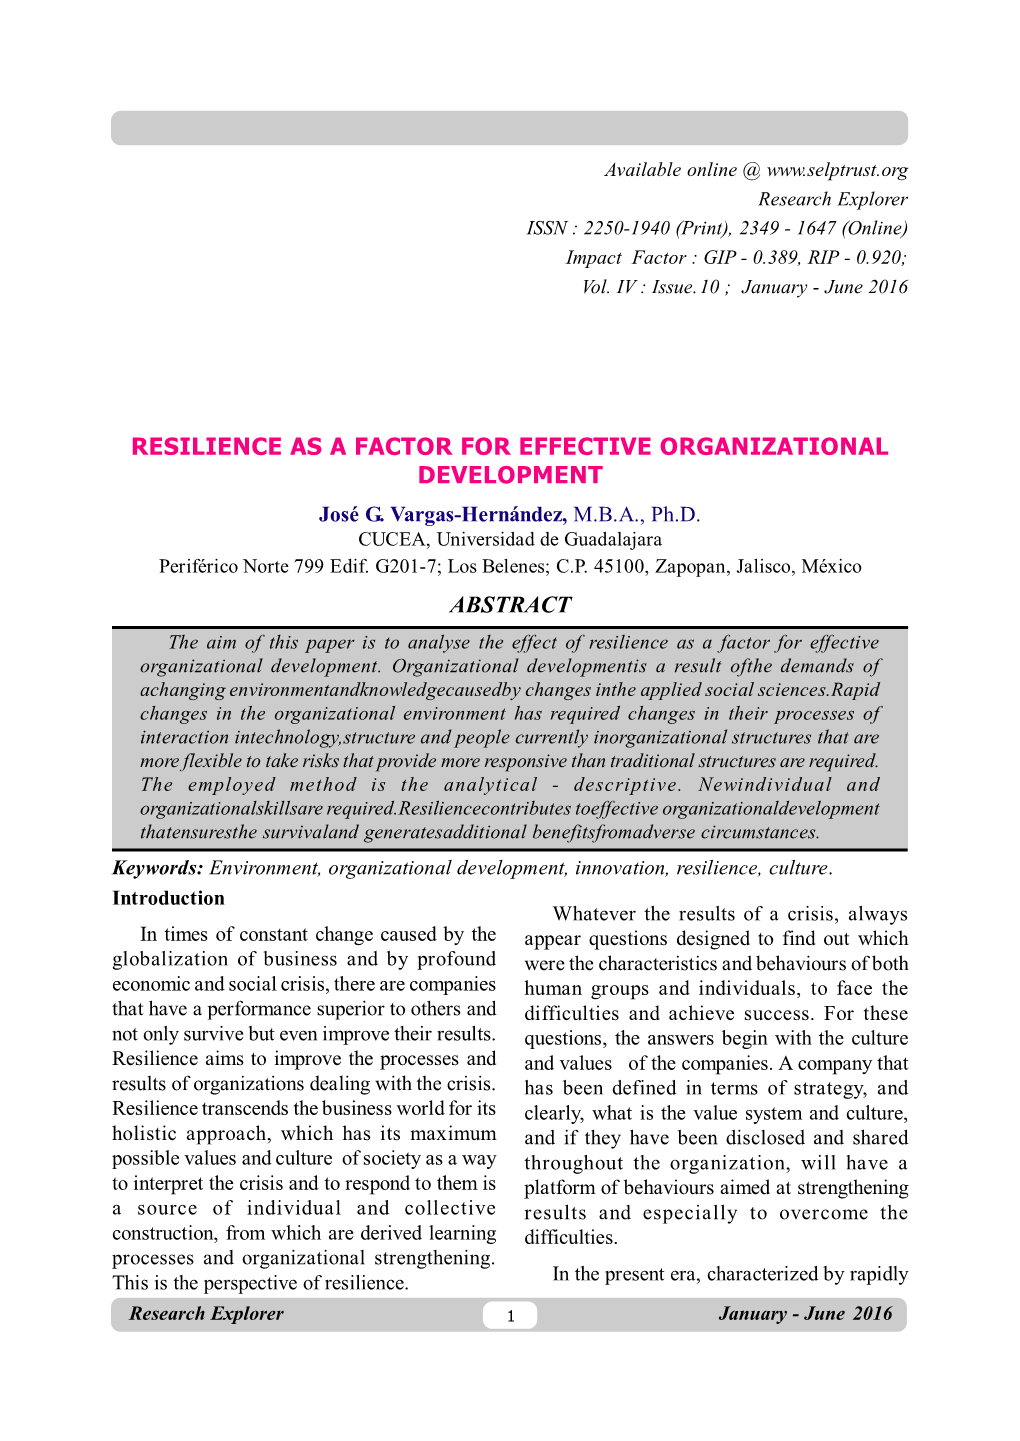 Resilience As a Factor for Effective Organizational Development Abstract